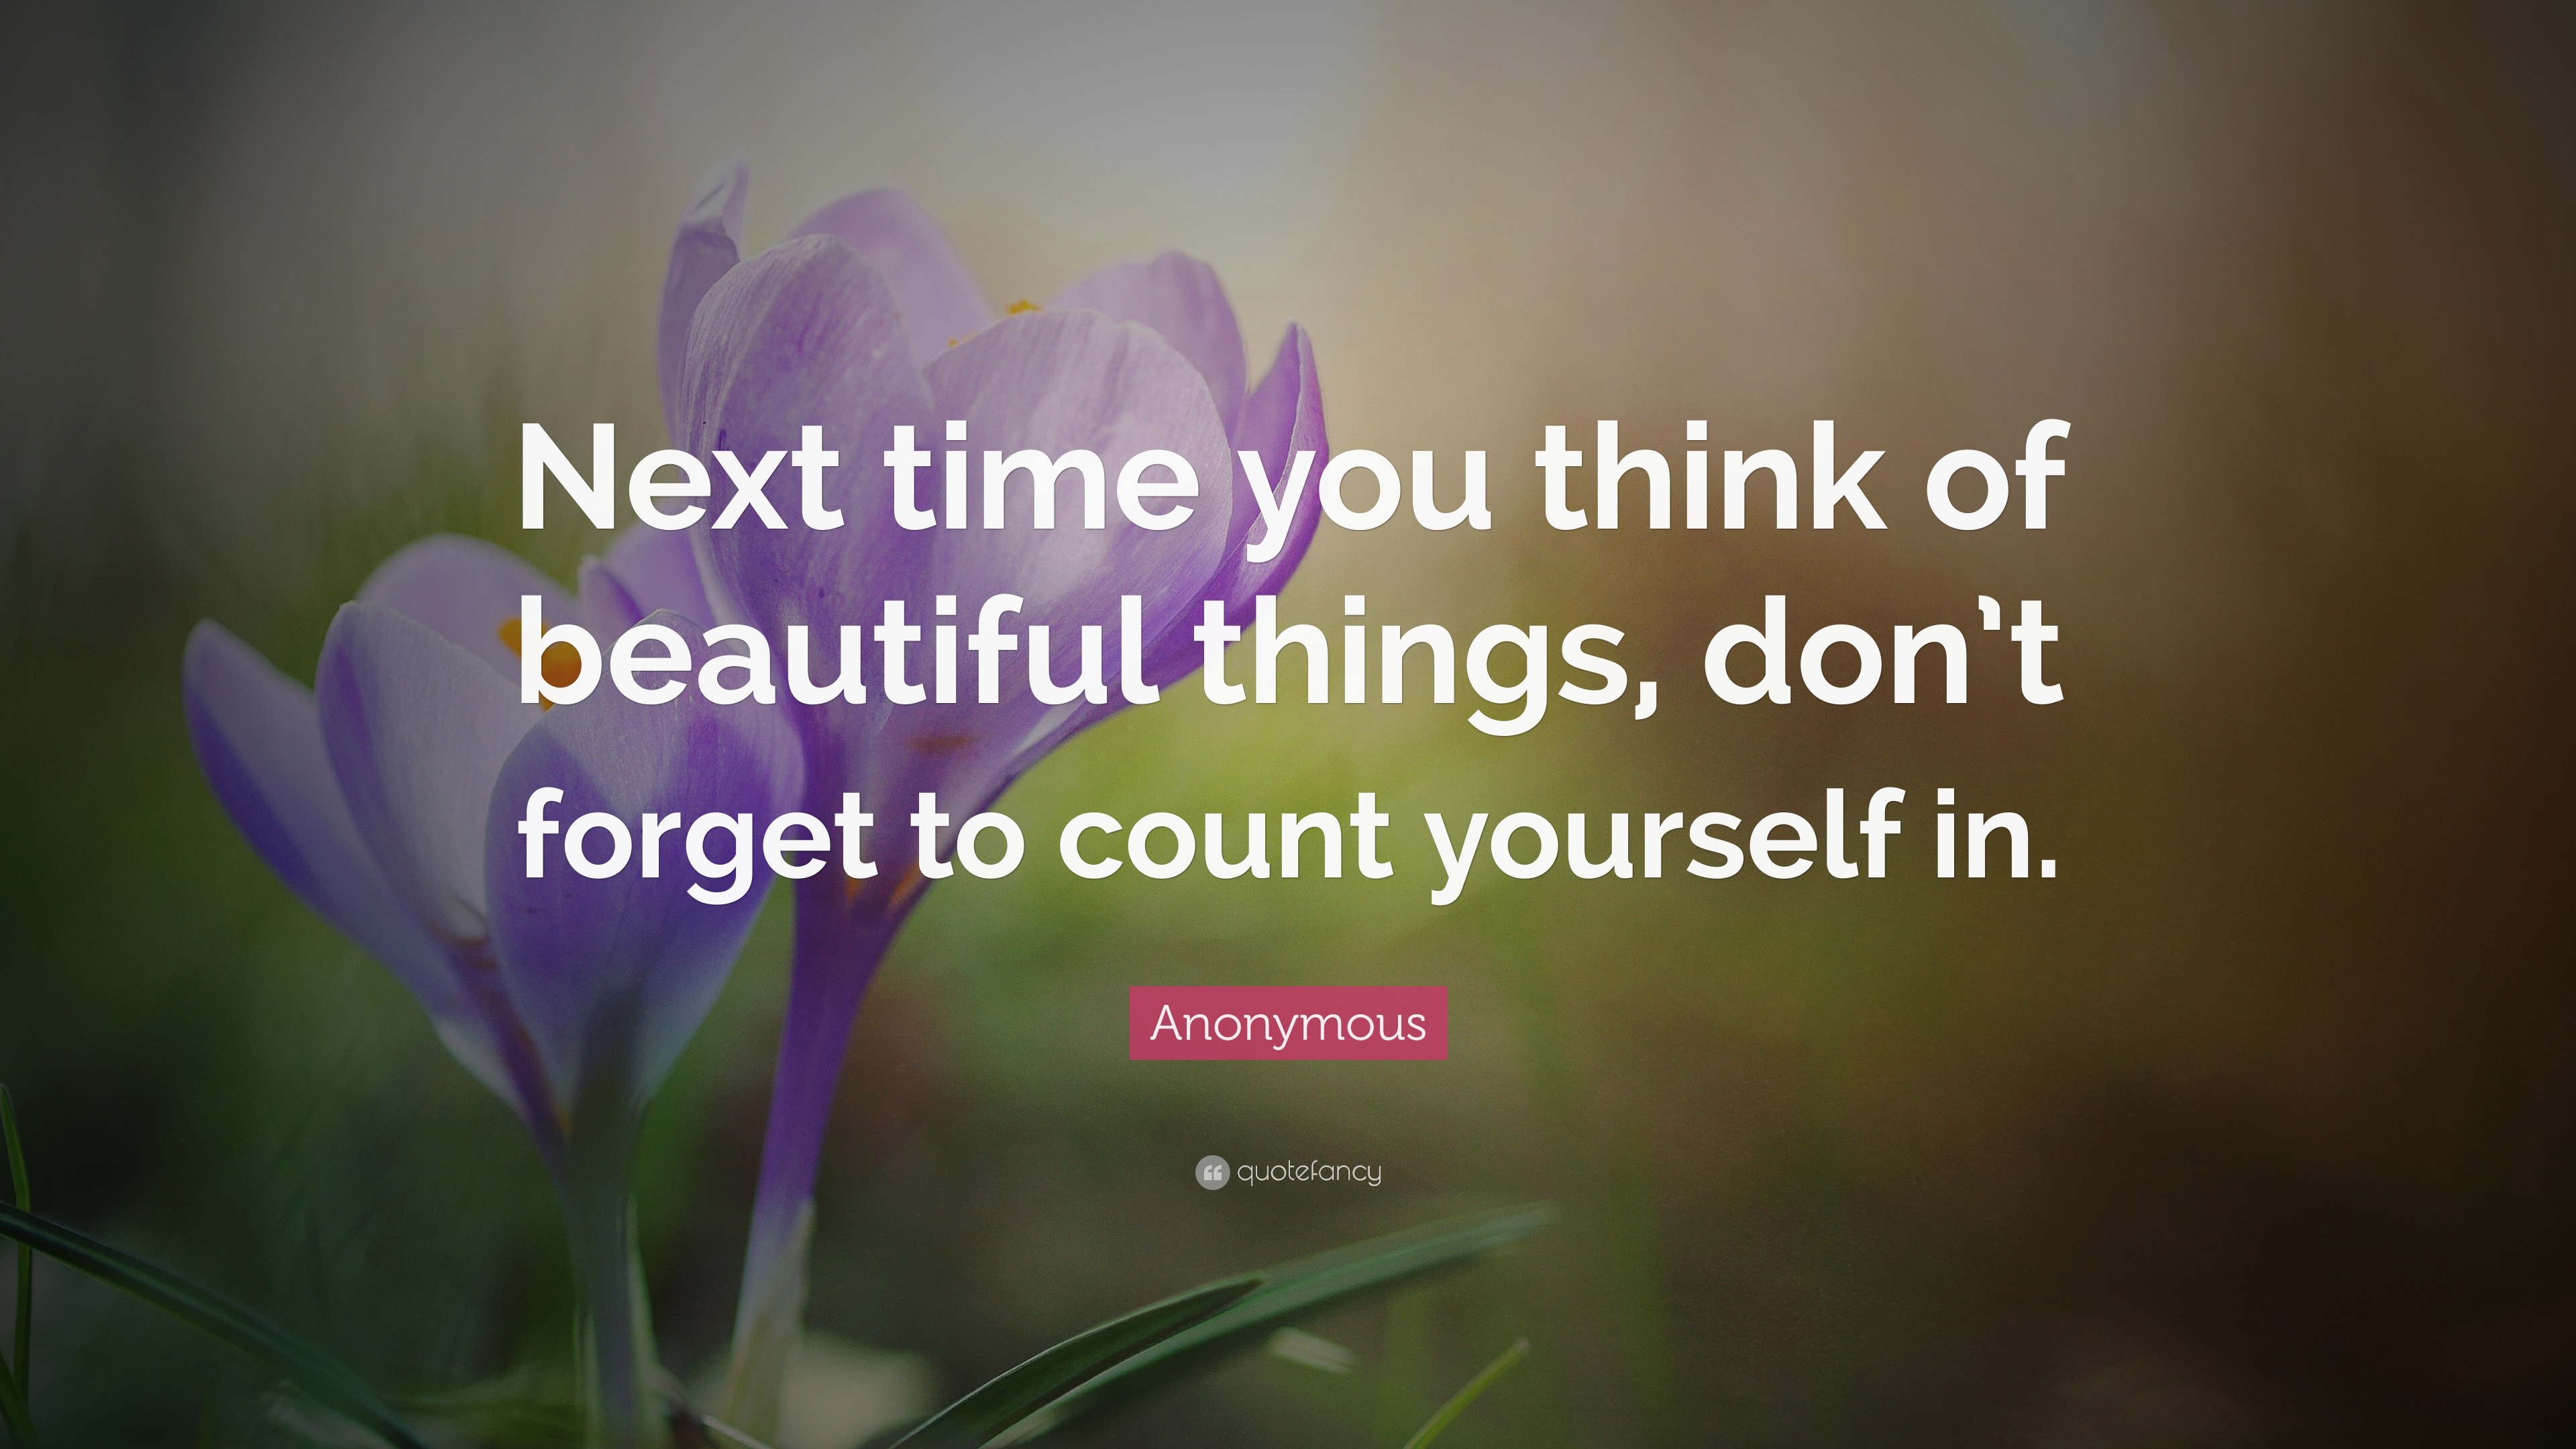 Anonymous Quote “Next time you think of beautiful things don t for